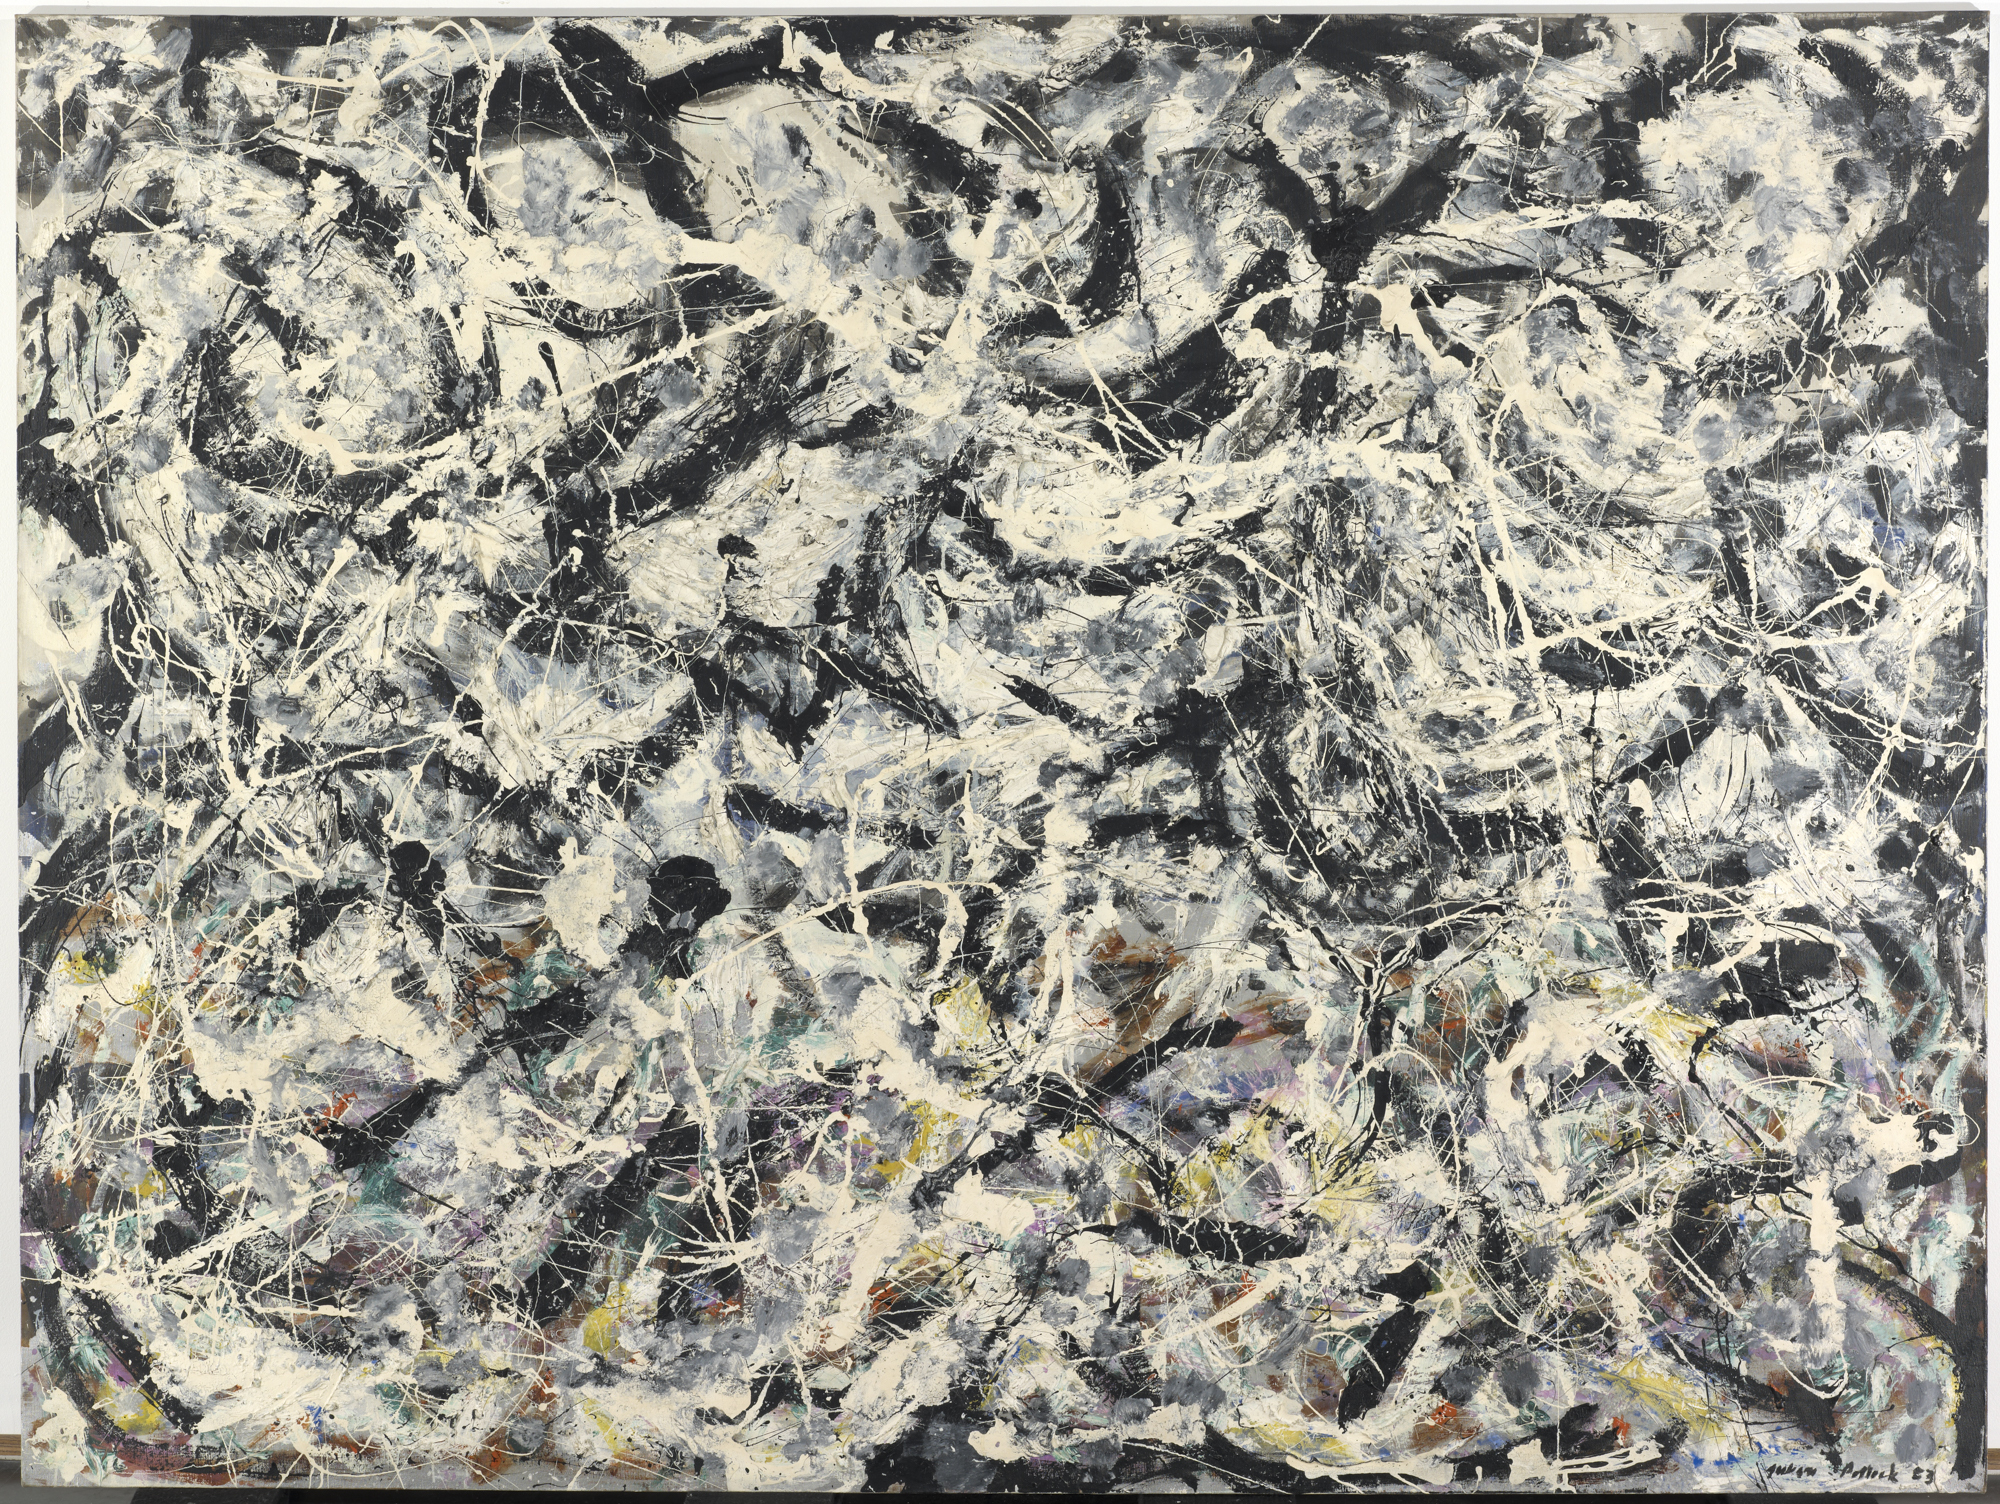 Abstract painting, black background covered with flicks and smudges of white and other colors.